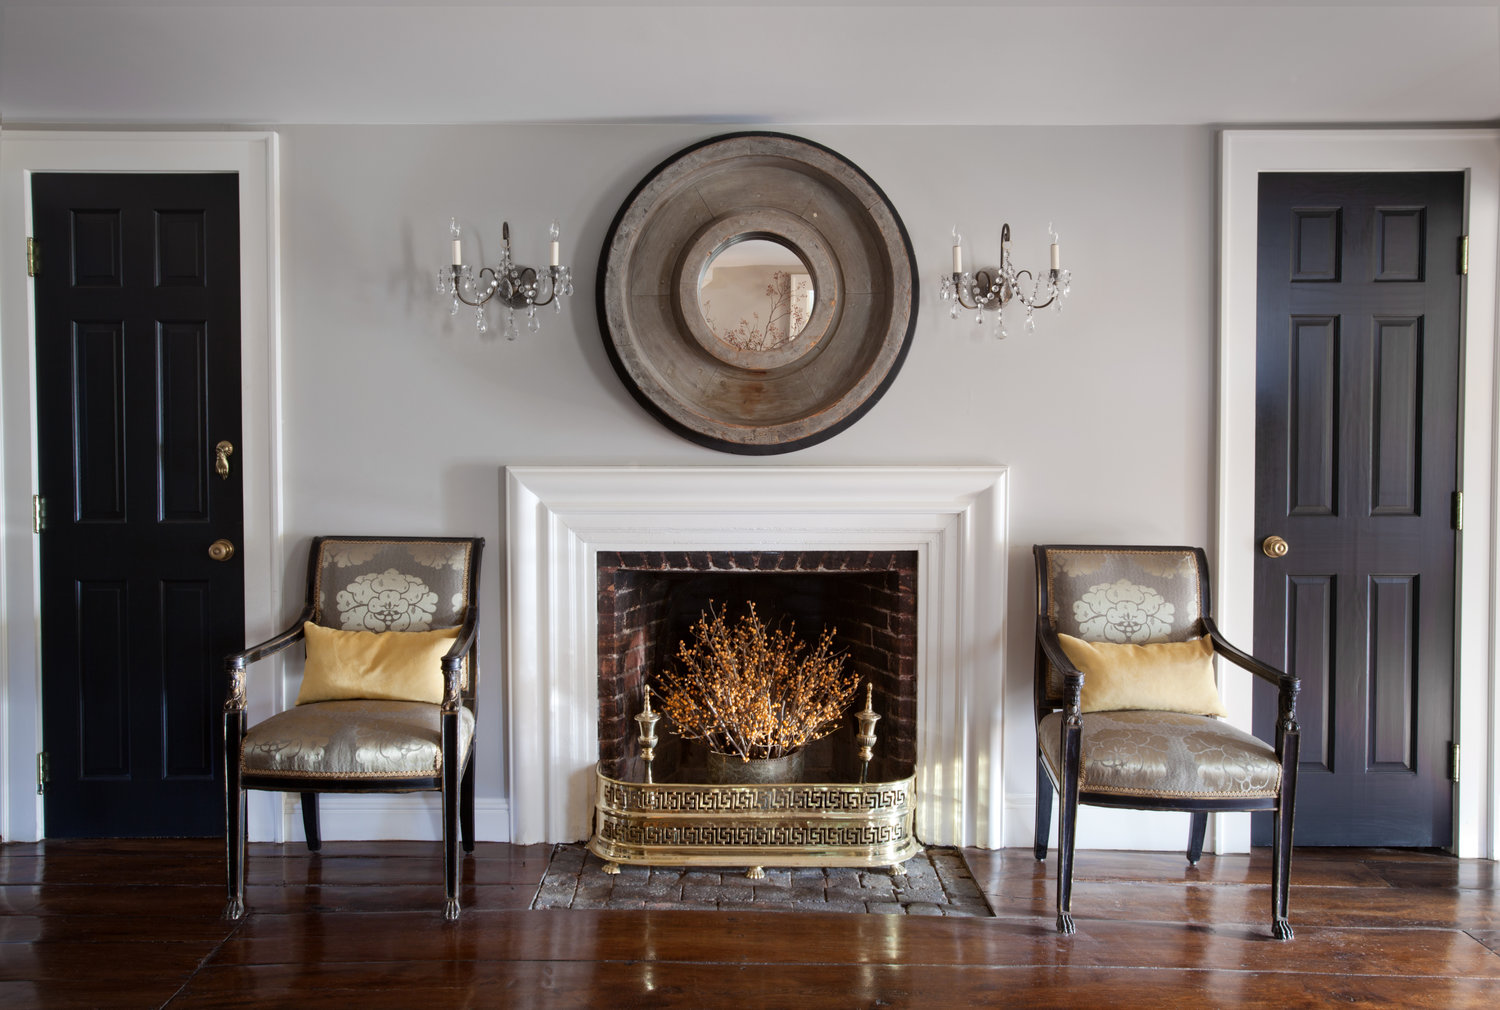 Photo by Keith Scott Morton for Connecticut Cottages & Gardens via 1stdibs